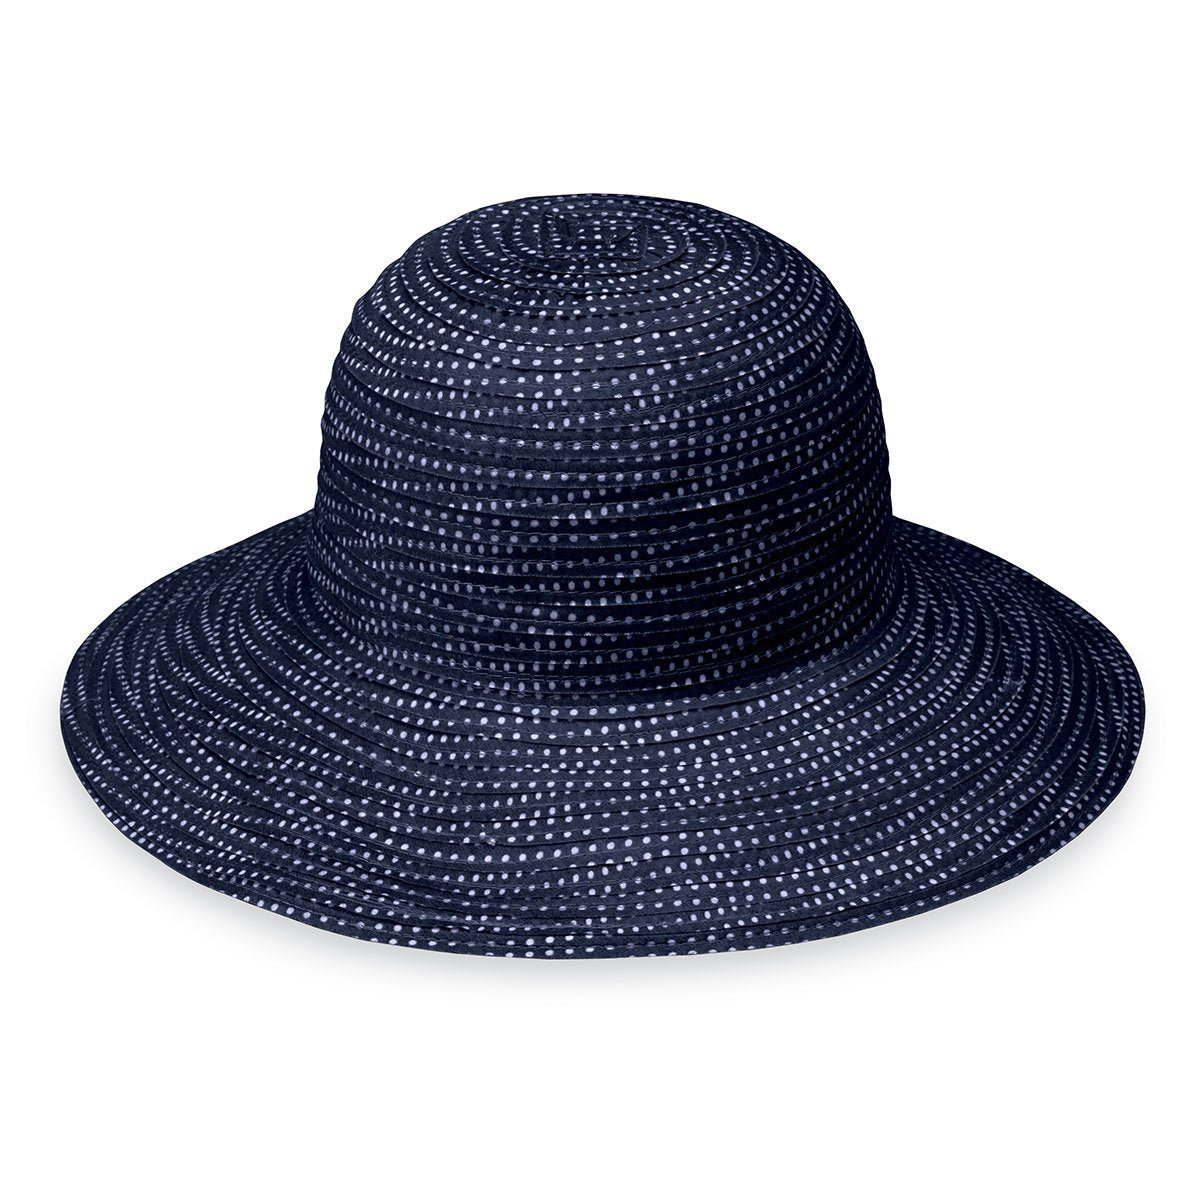 Featuring Ladies' Packable Petite Scrunchie UPF Summer Sun Hat from Wallaroo